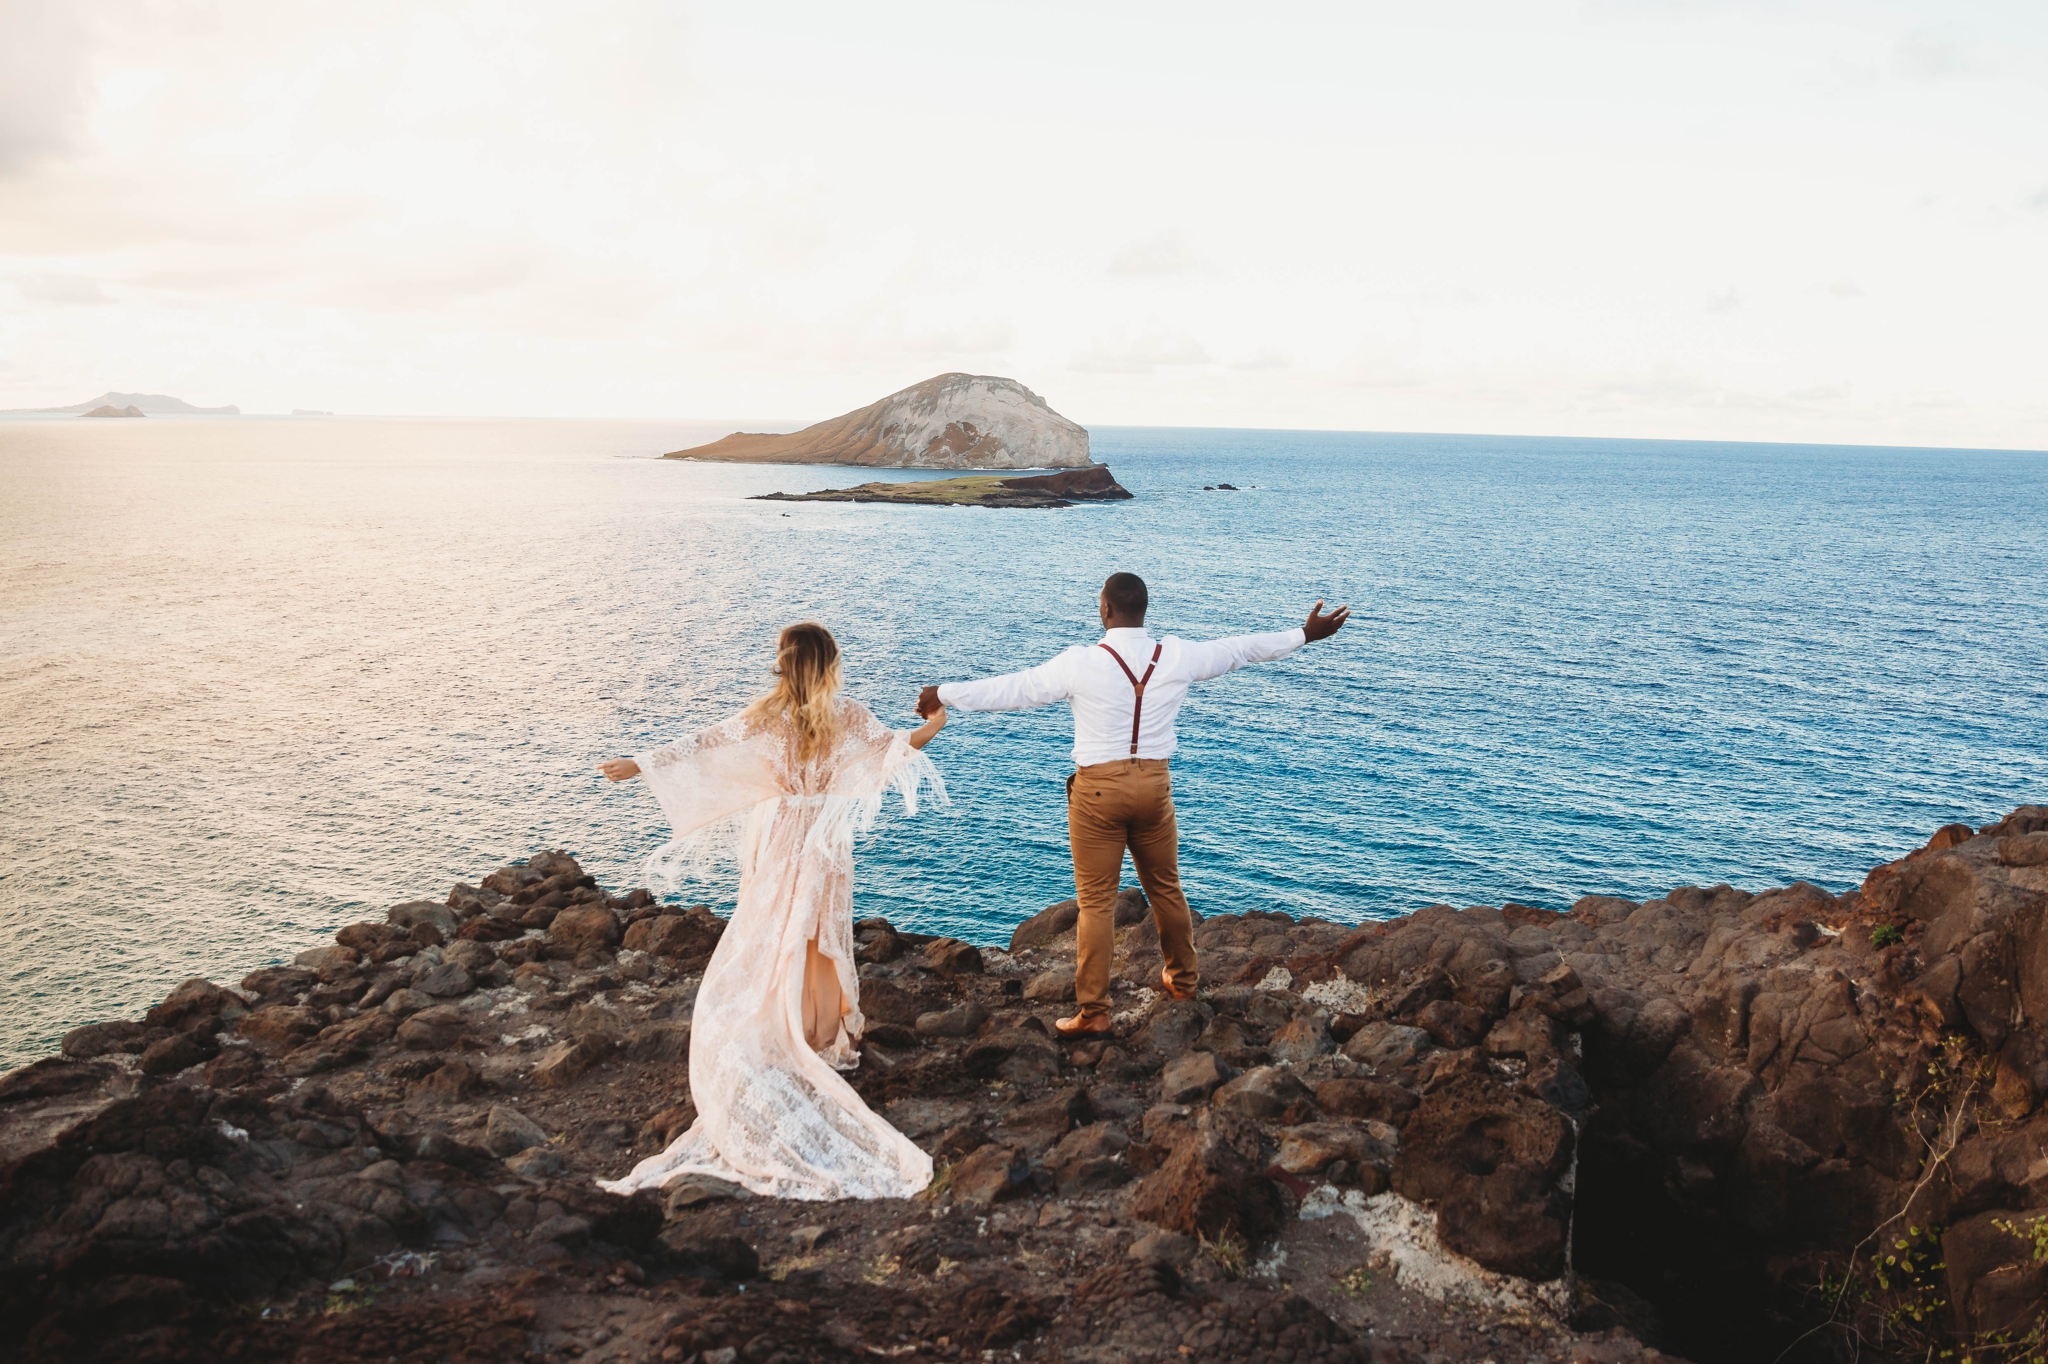  couple on the cliffs above Makapuu Beach at the Lookout, Waimanalo, HI looking over the ocean with the  Kāohikaipu Island in the background  - Oahu Hawaii Engagement Photographer - Bride in a flowy fringe boho wedding dress - lanikai lookout - deuts